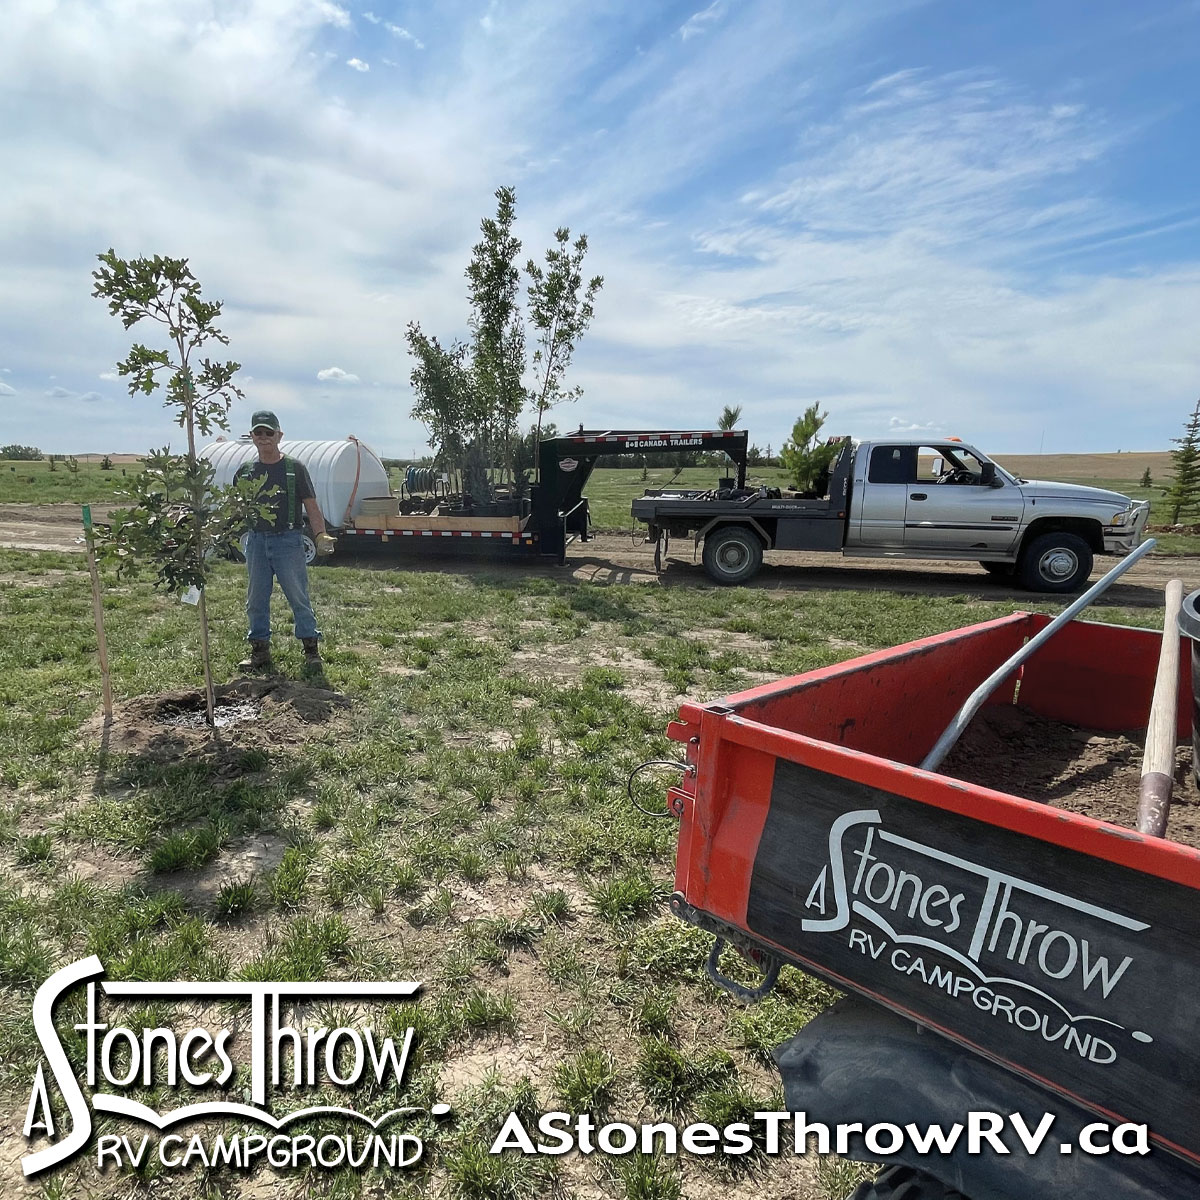 Brian Plants a Oak Tree, A Stones Throw RV Campground's first Oak tree has been planted!